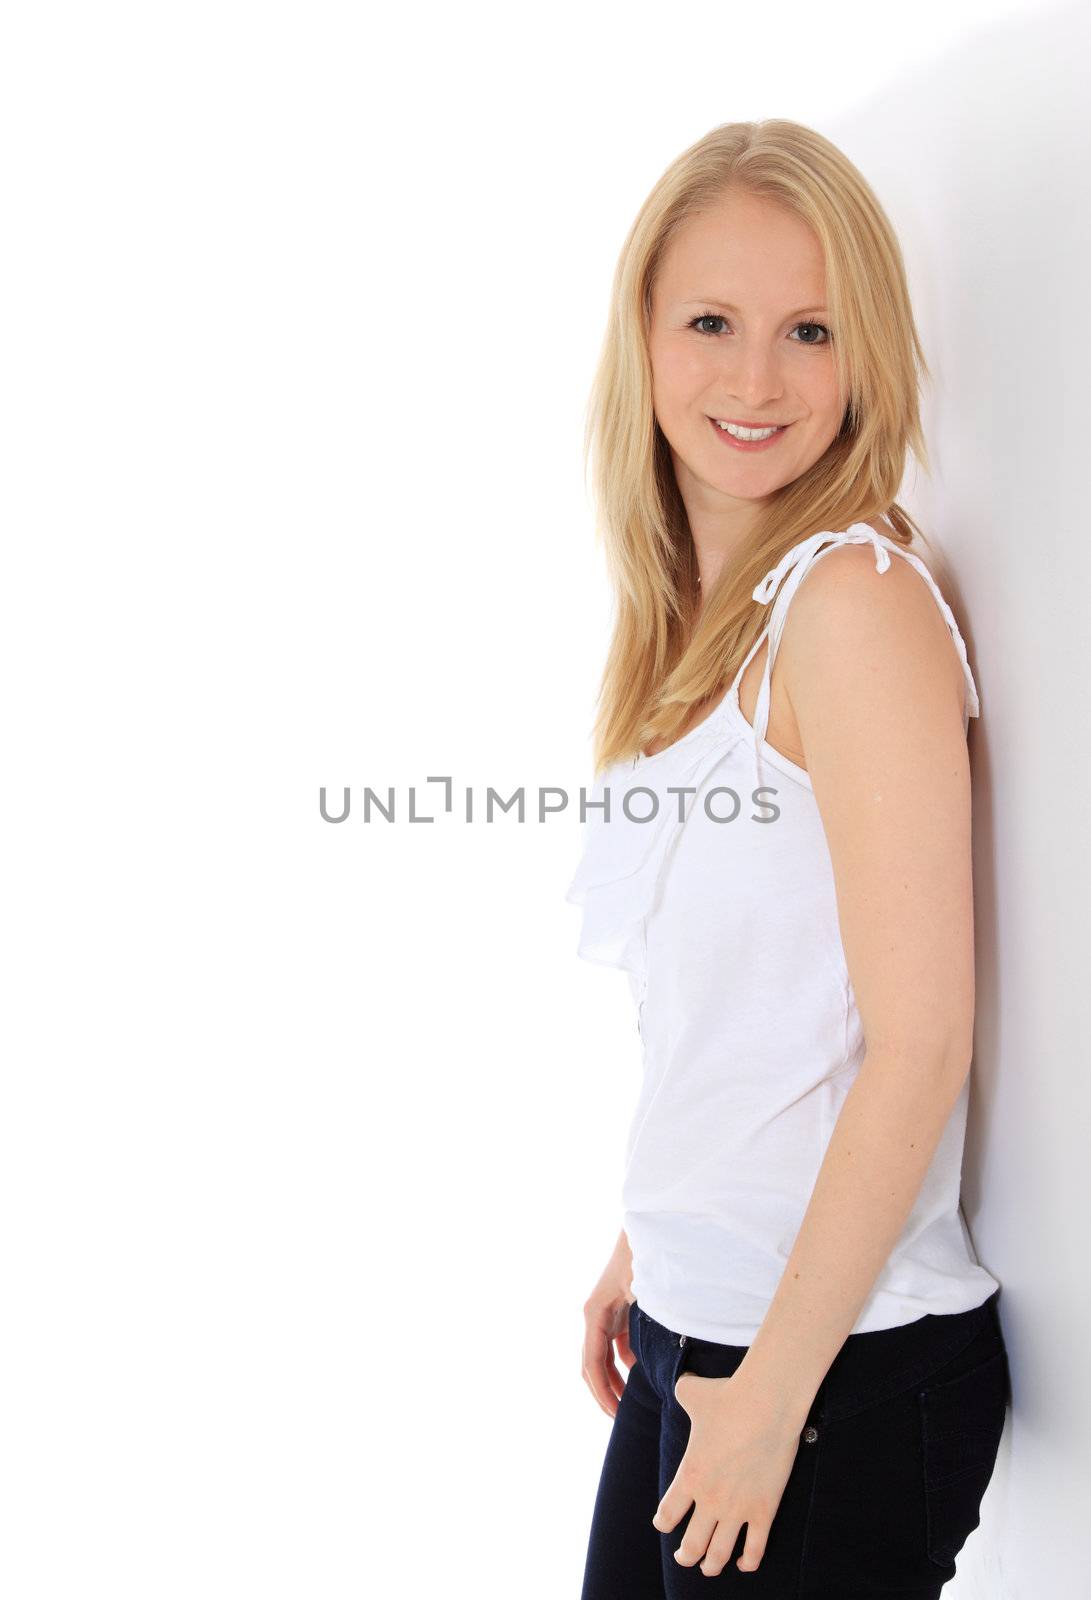 Attractive girl leaning against a wall. All on white background.